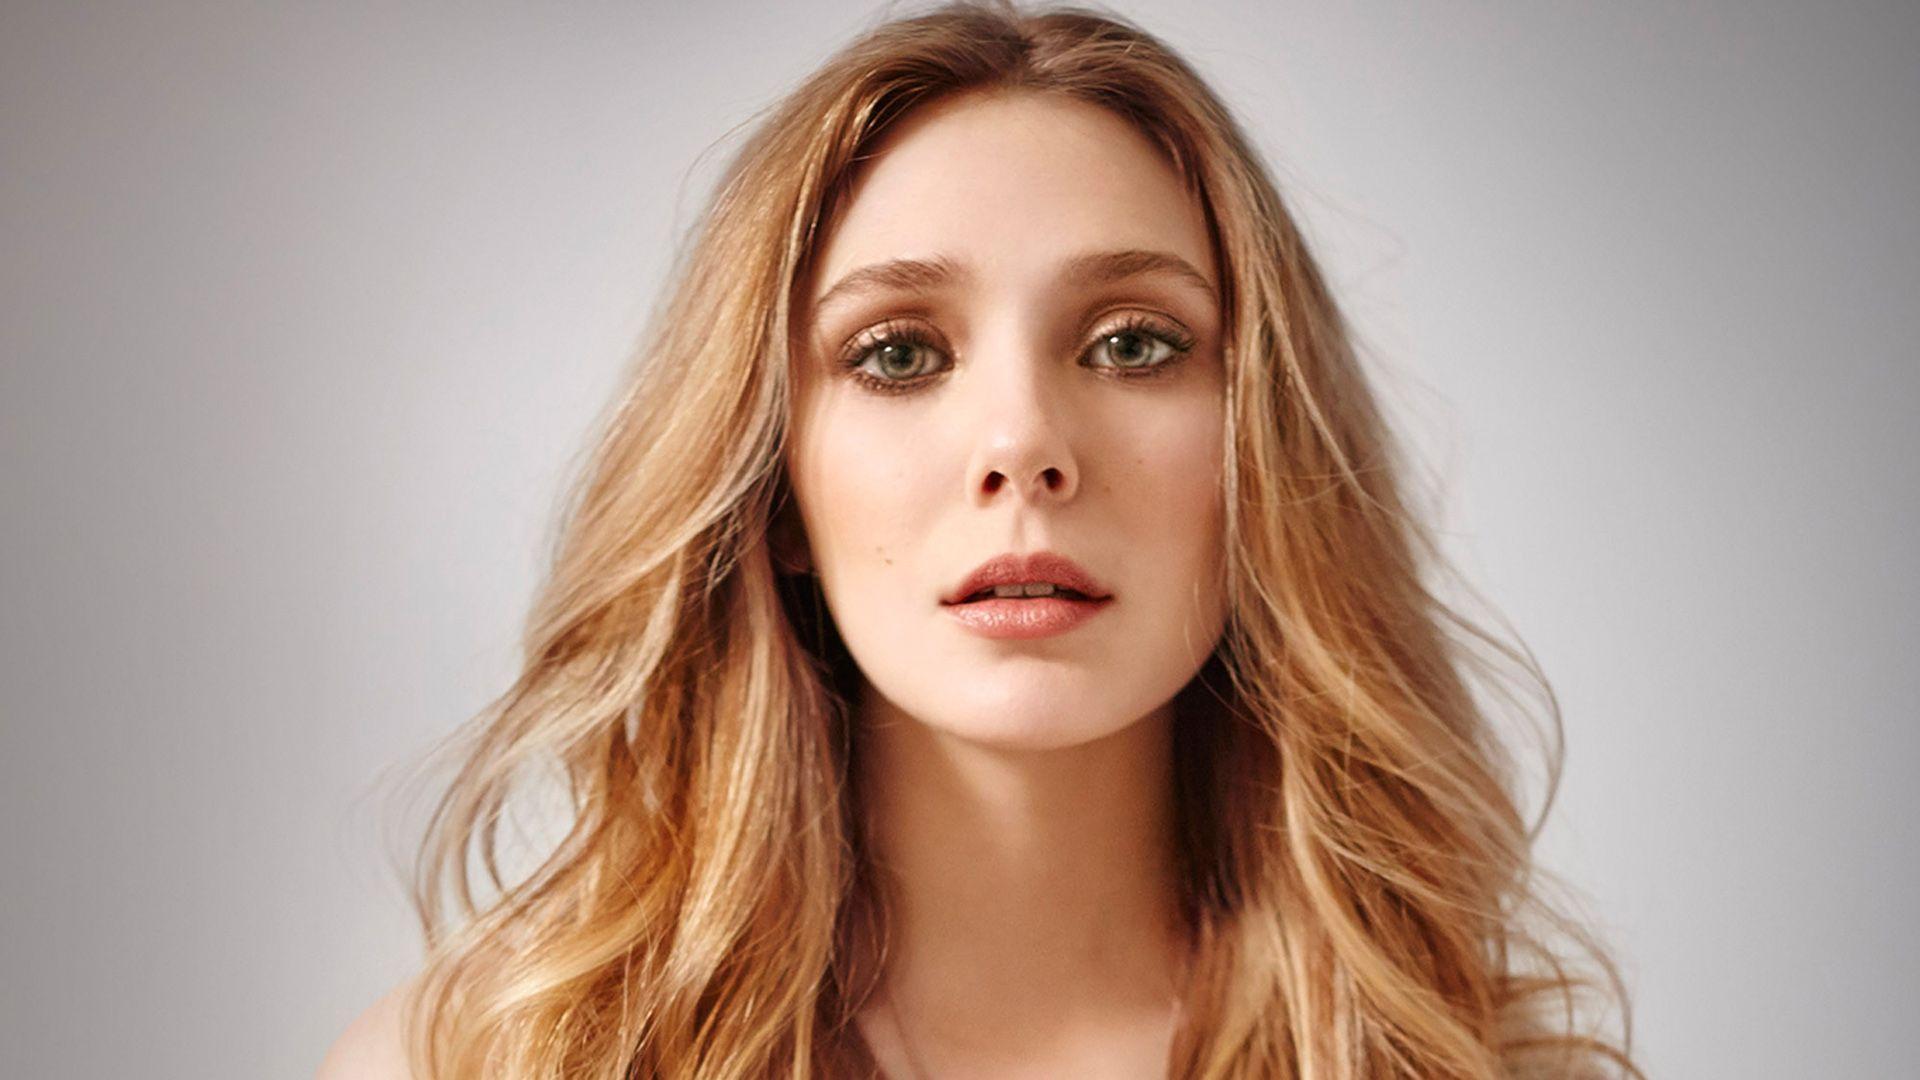 Elizabeth Olsen Hot HD Wallpaper 2014 15 Picture To Pin On